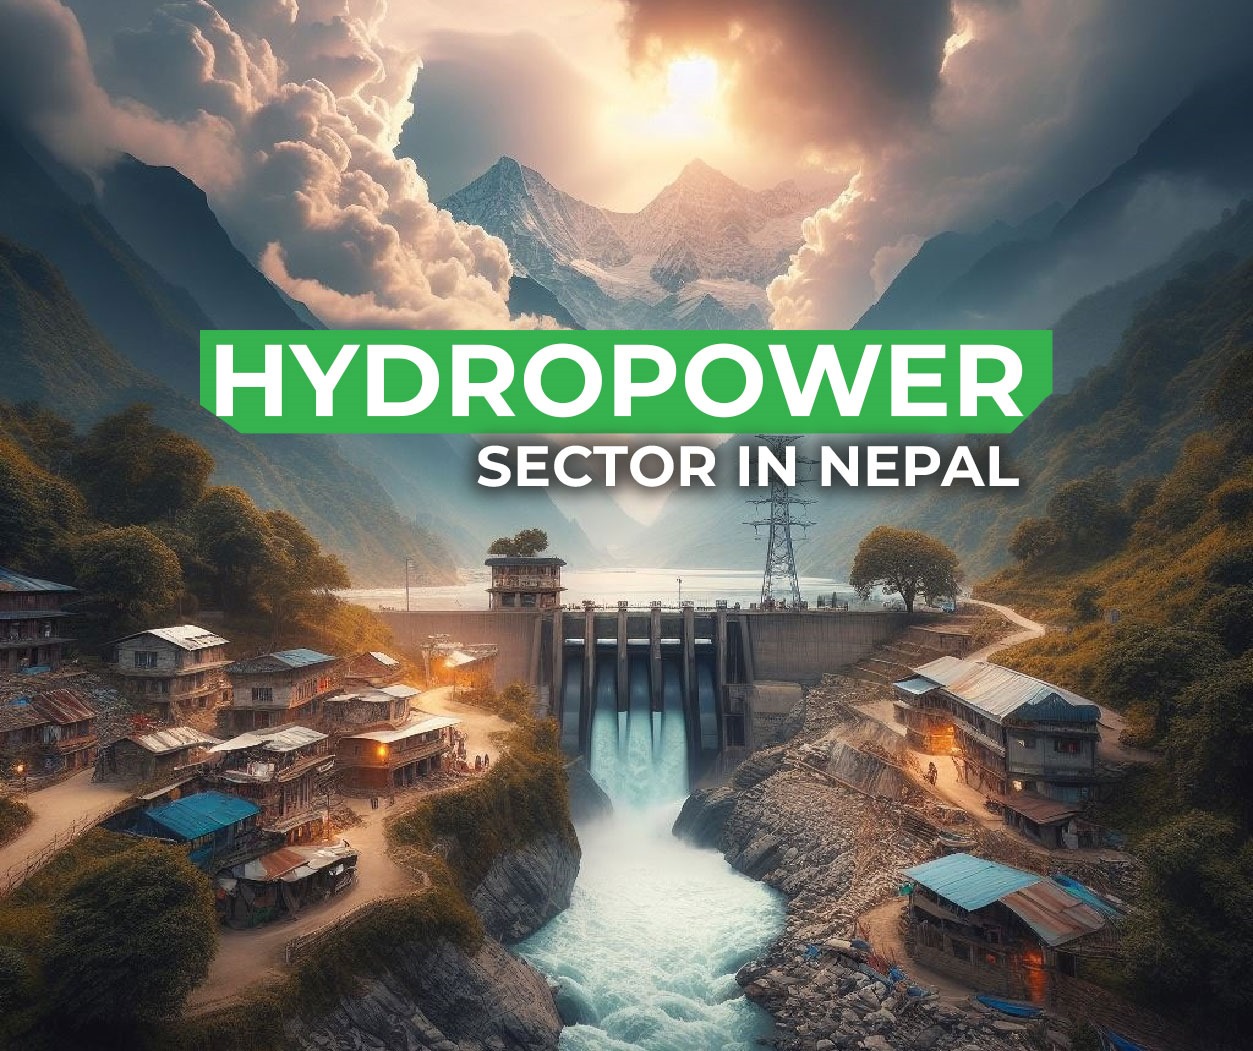 Nepal's Hydropower Landscape: A Comprehensive Sectoral Analysis